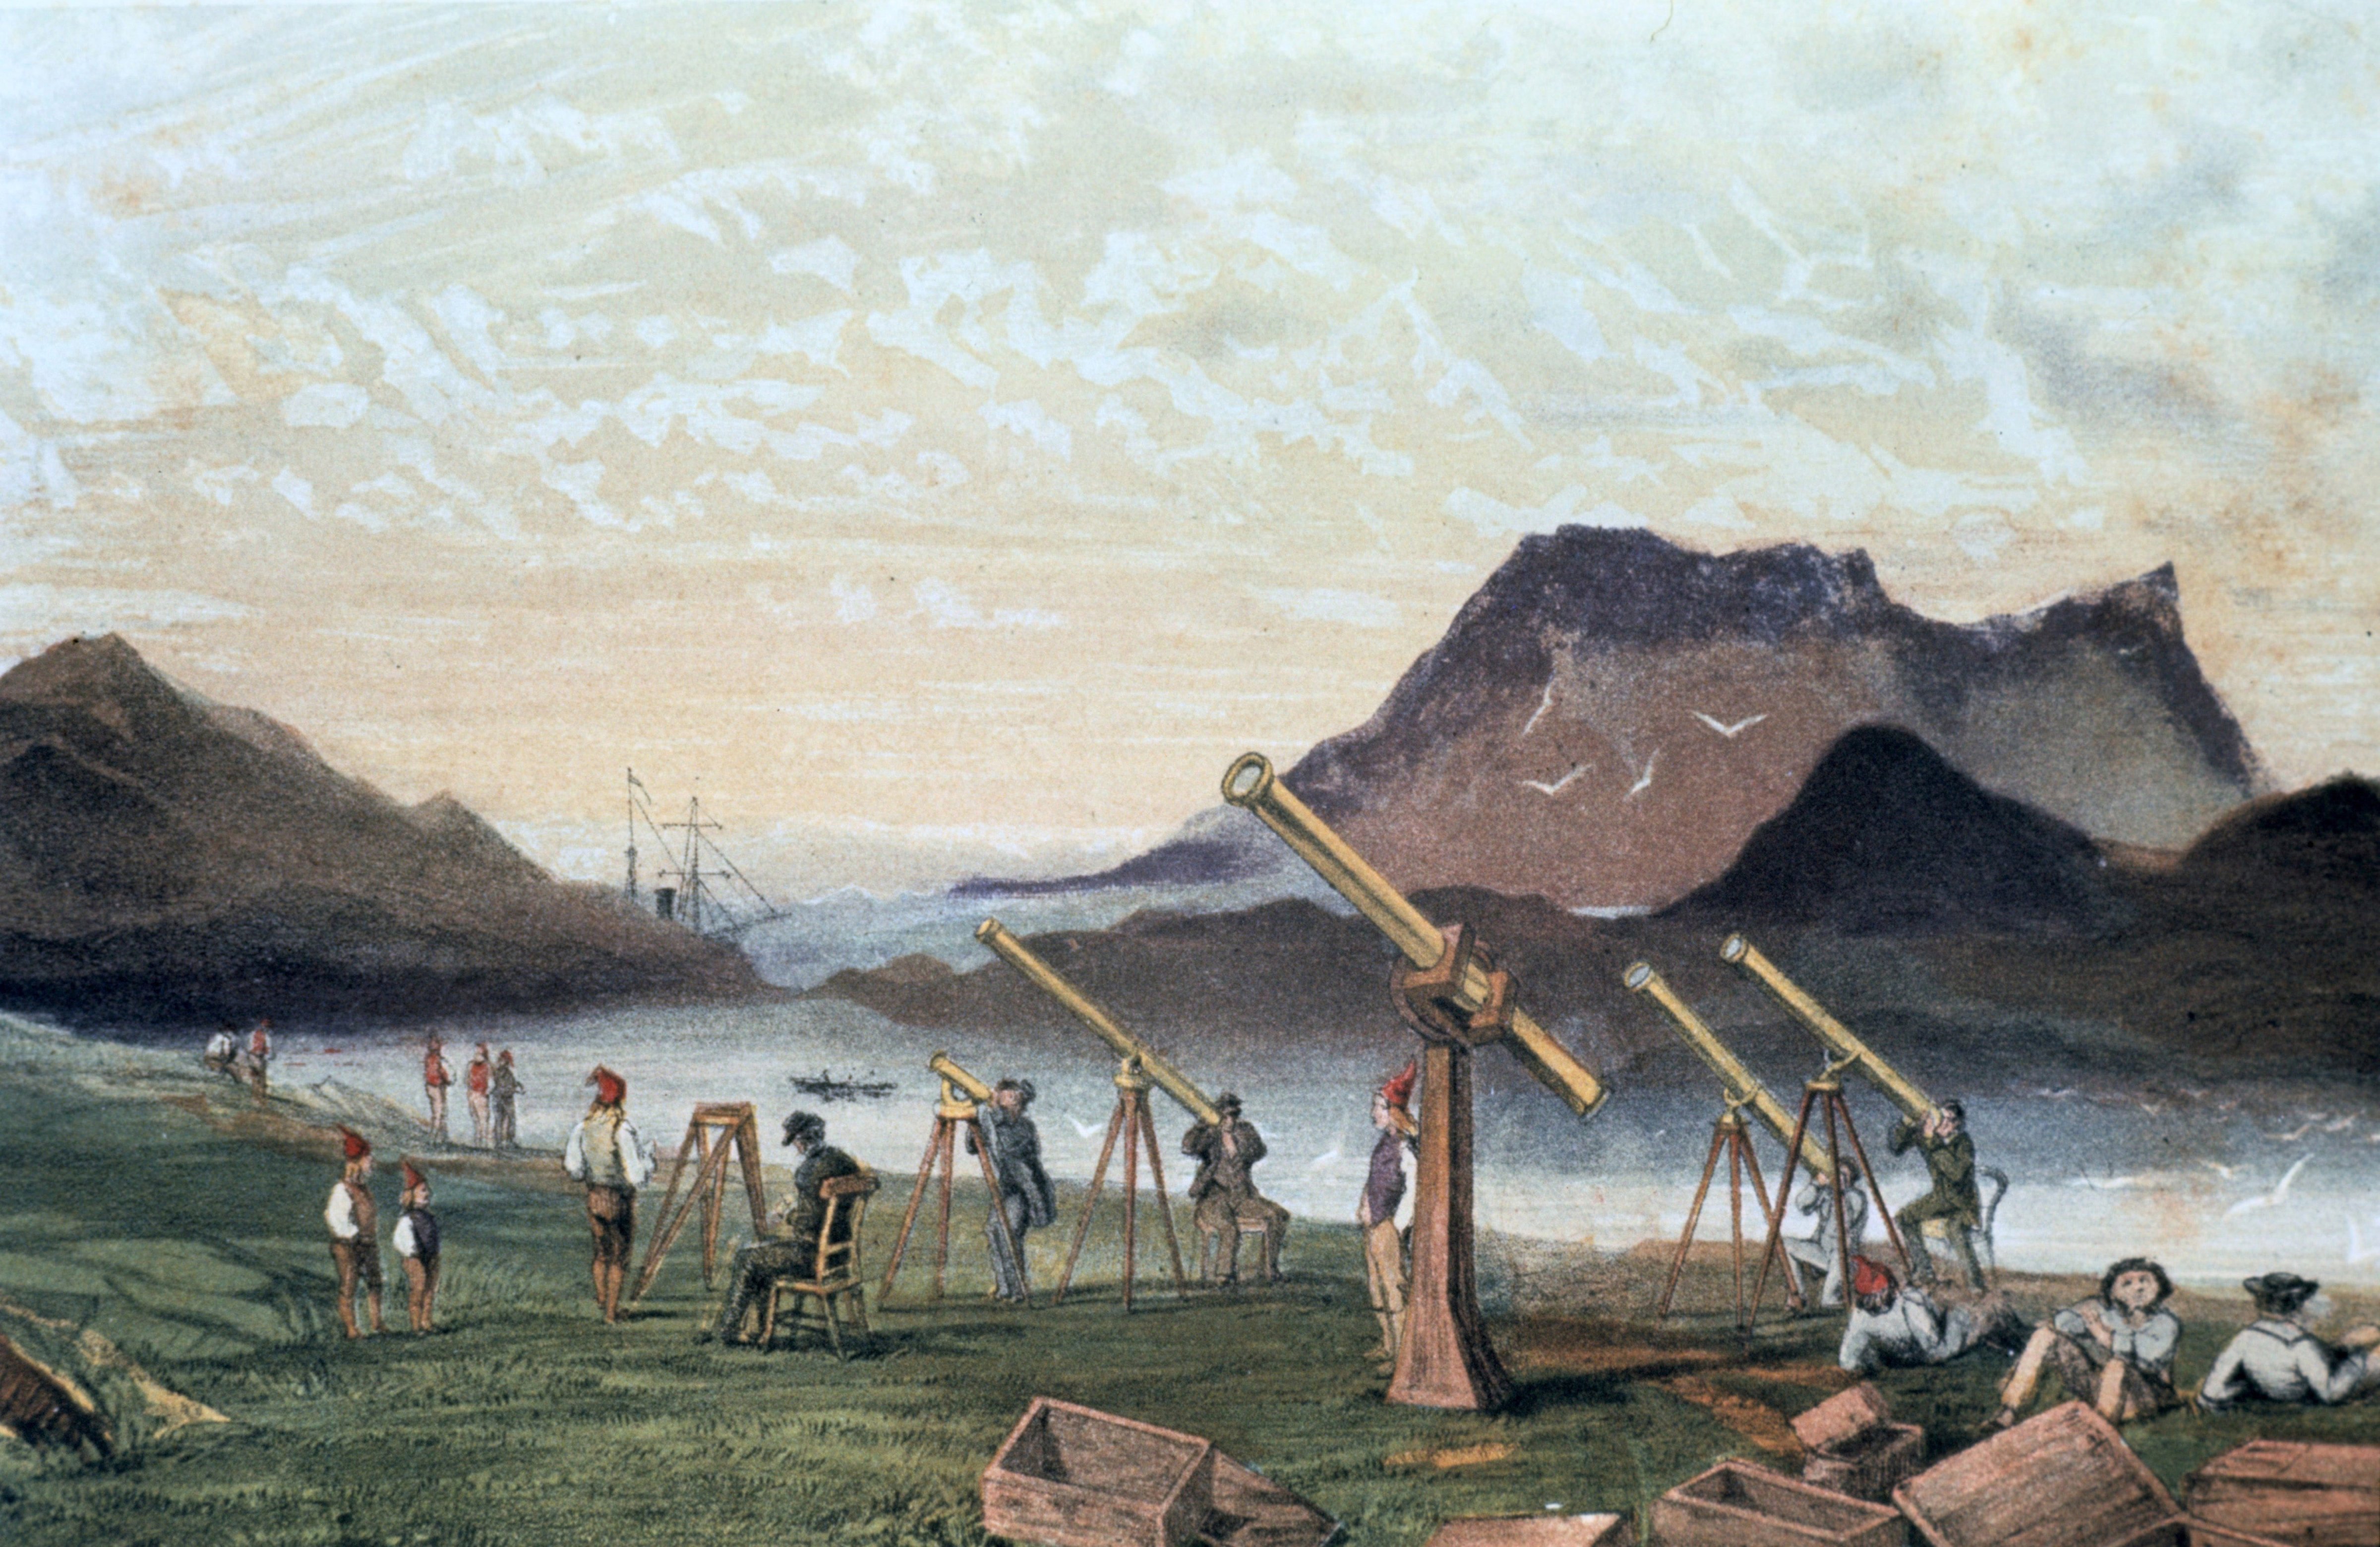 Total Solar Eclipse, 1851. Members of the Edinburgh expedition on Bue Island, Norway with their instruments set up ready for viewing the eclipse , 28 July 1851. Members of the crew from their transport vessel are seated on right by empty packing cases. From Astronomical Observations made at the Royal Observatory, Edinburgh. (UniversalImagesGroup—Getty Images)